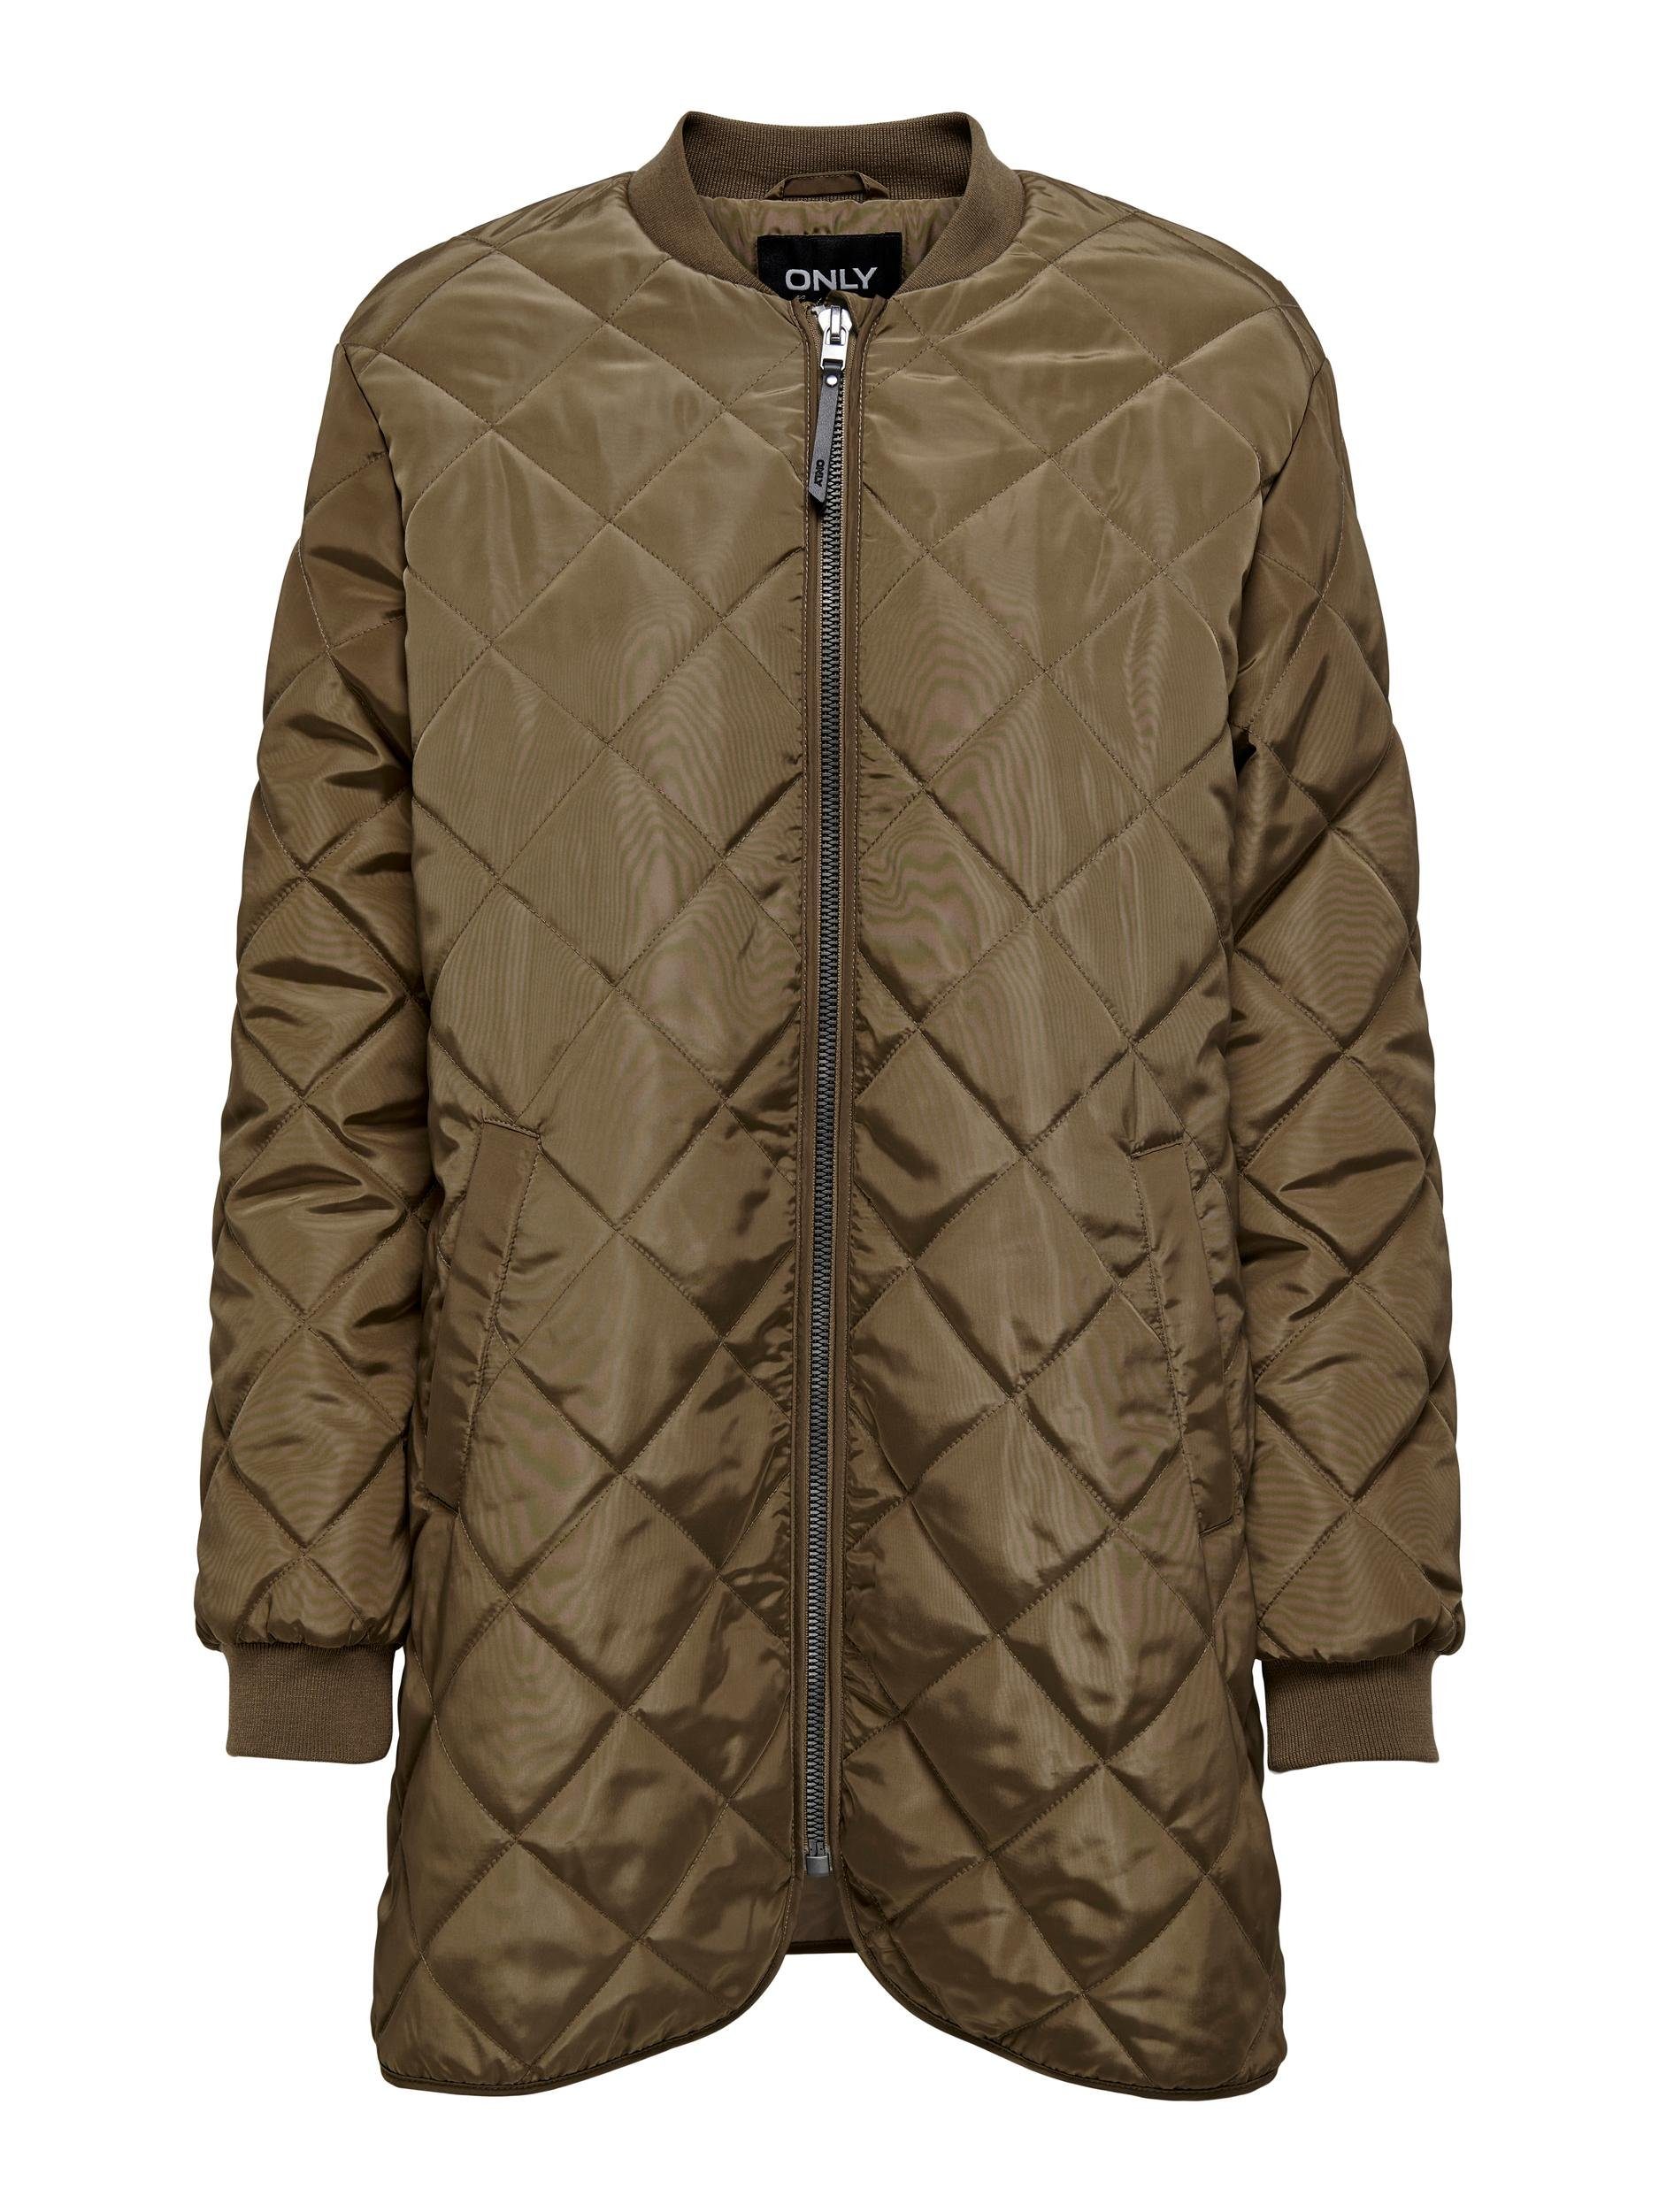 ONLY CC ONLNEWJESSICA OTW Otter Steppjacke JACKET QUILTED